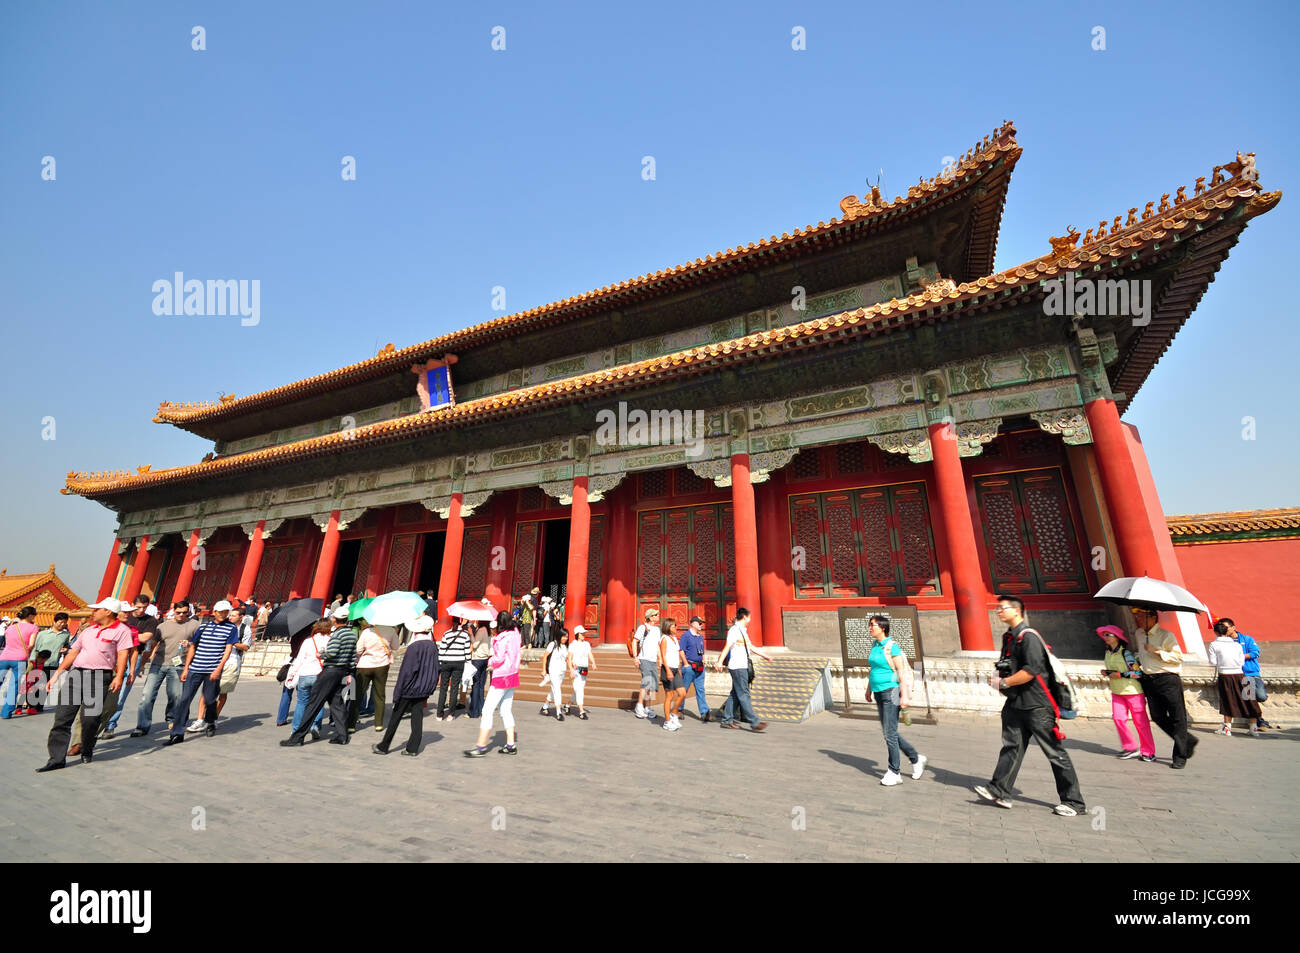 Beijing, China - September 22, 2009: Tourists at the Forbidden city, Chinese imperial palace from the Ming dynasty to Qing dynasty. It is China's most Stock Photo